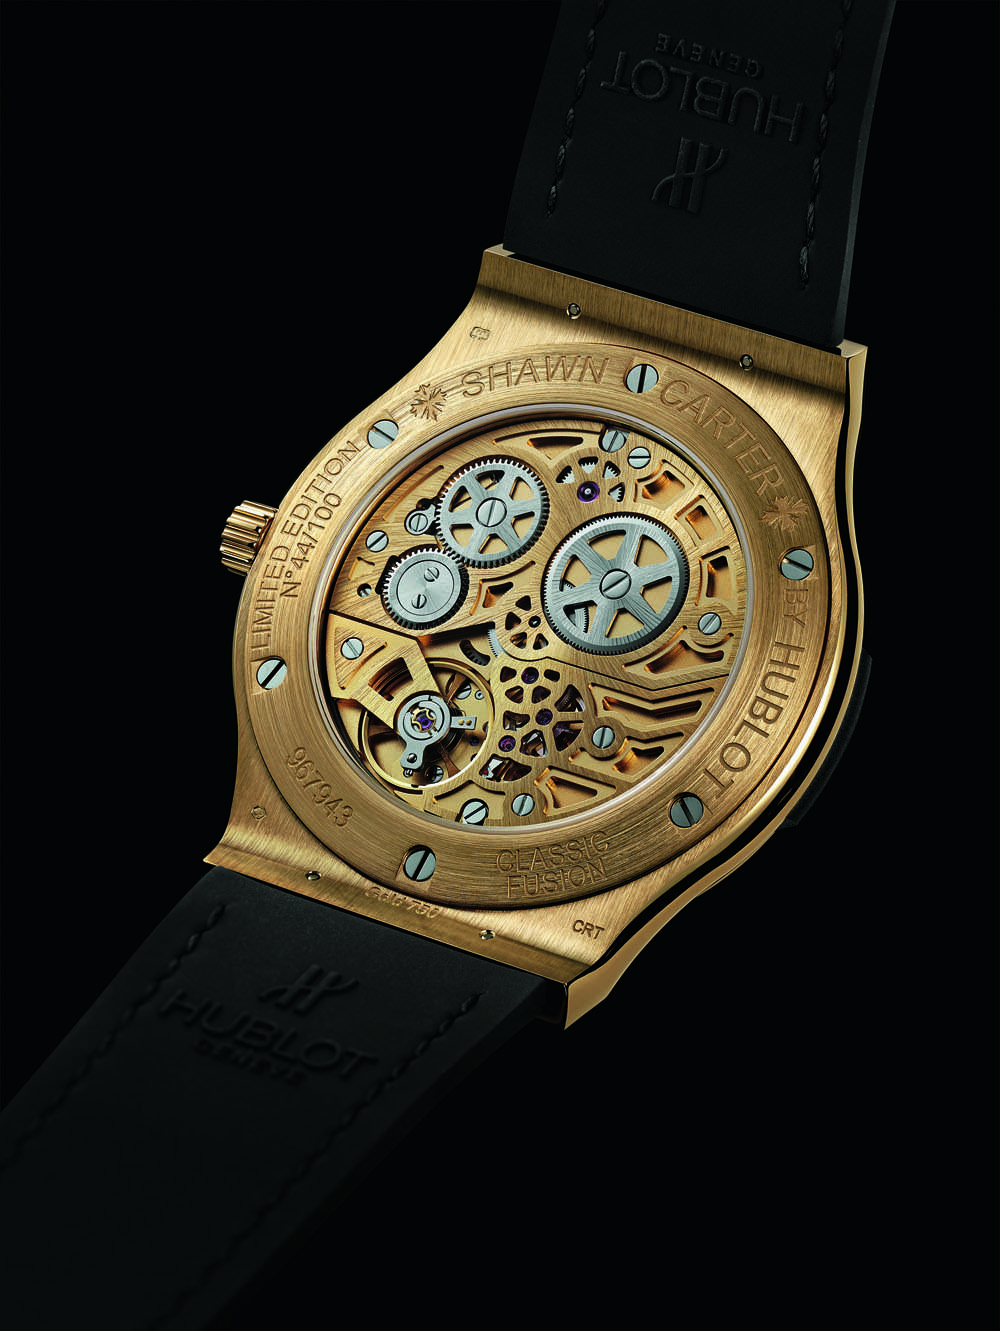 Jay-Z Watch Collection Includes a 5 Million Dollar Hublot Big Bang – IFL  Watches